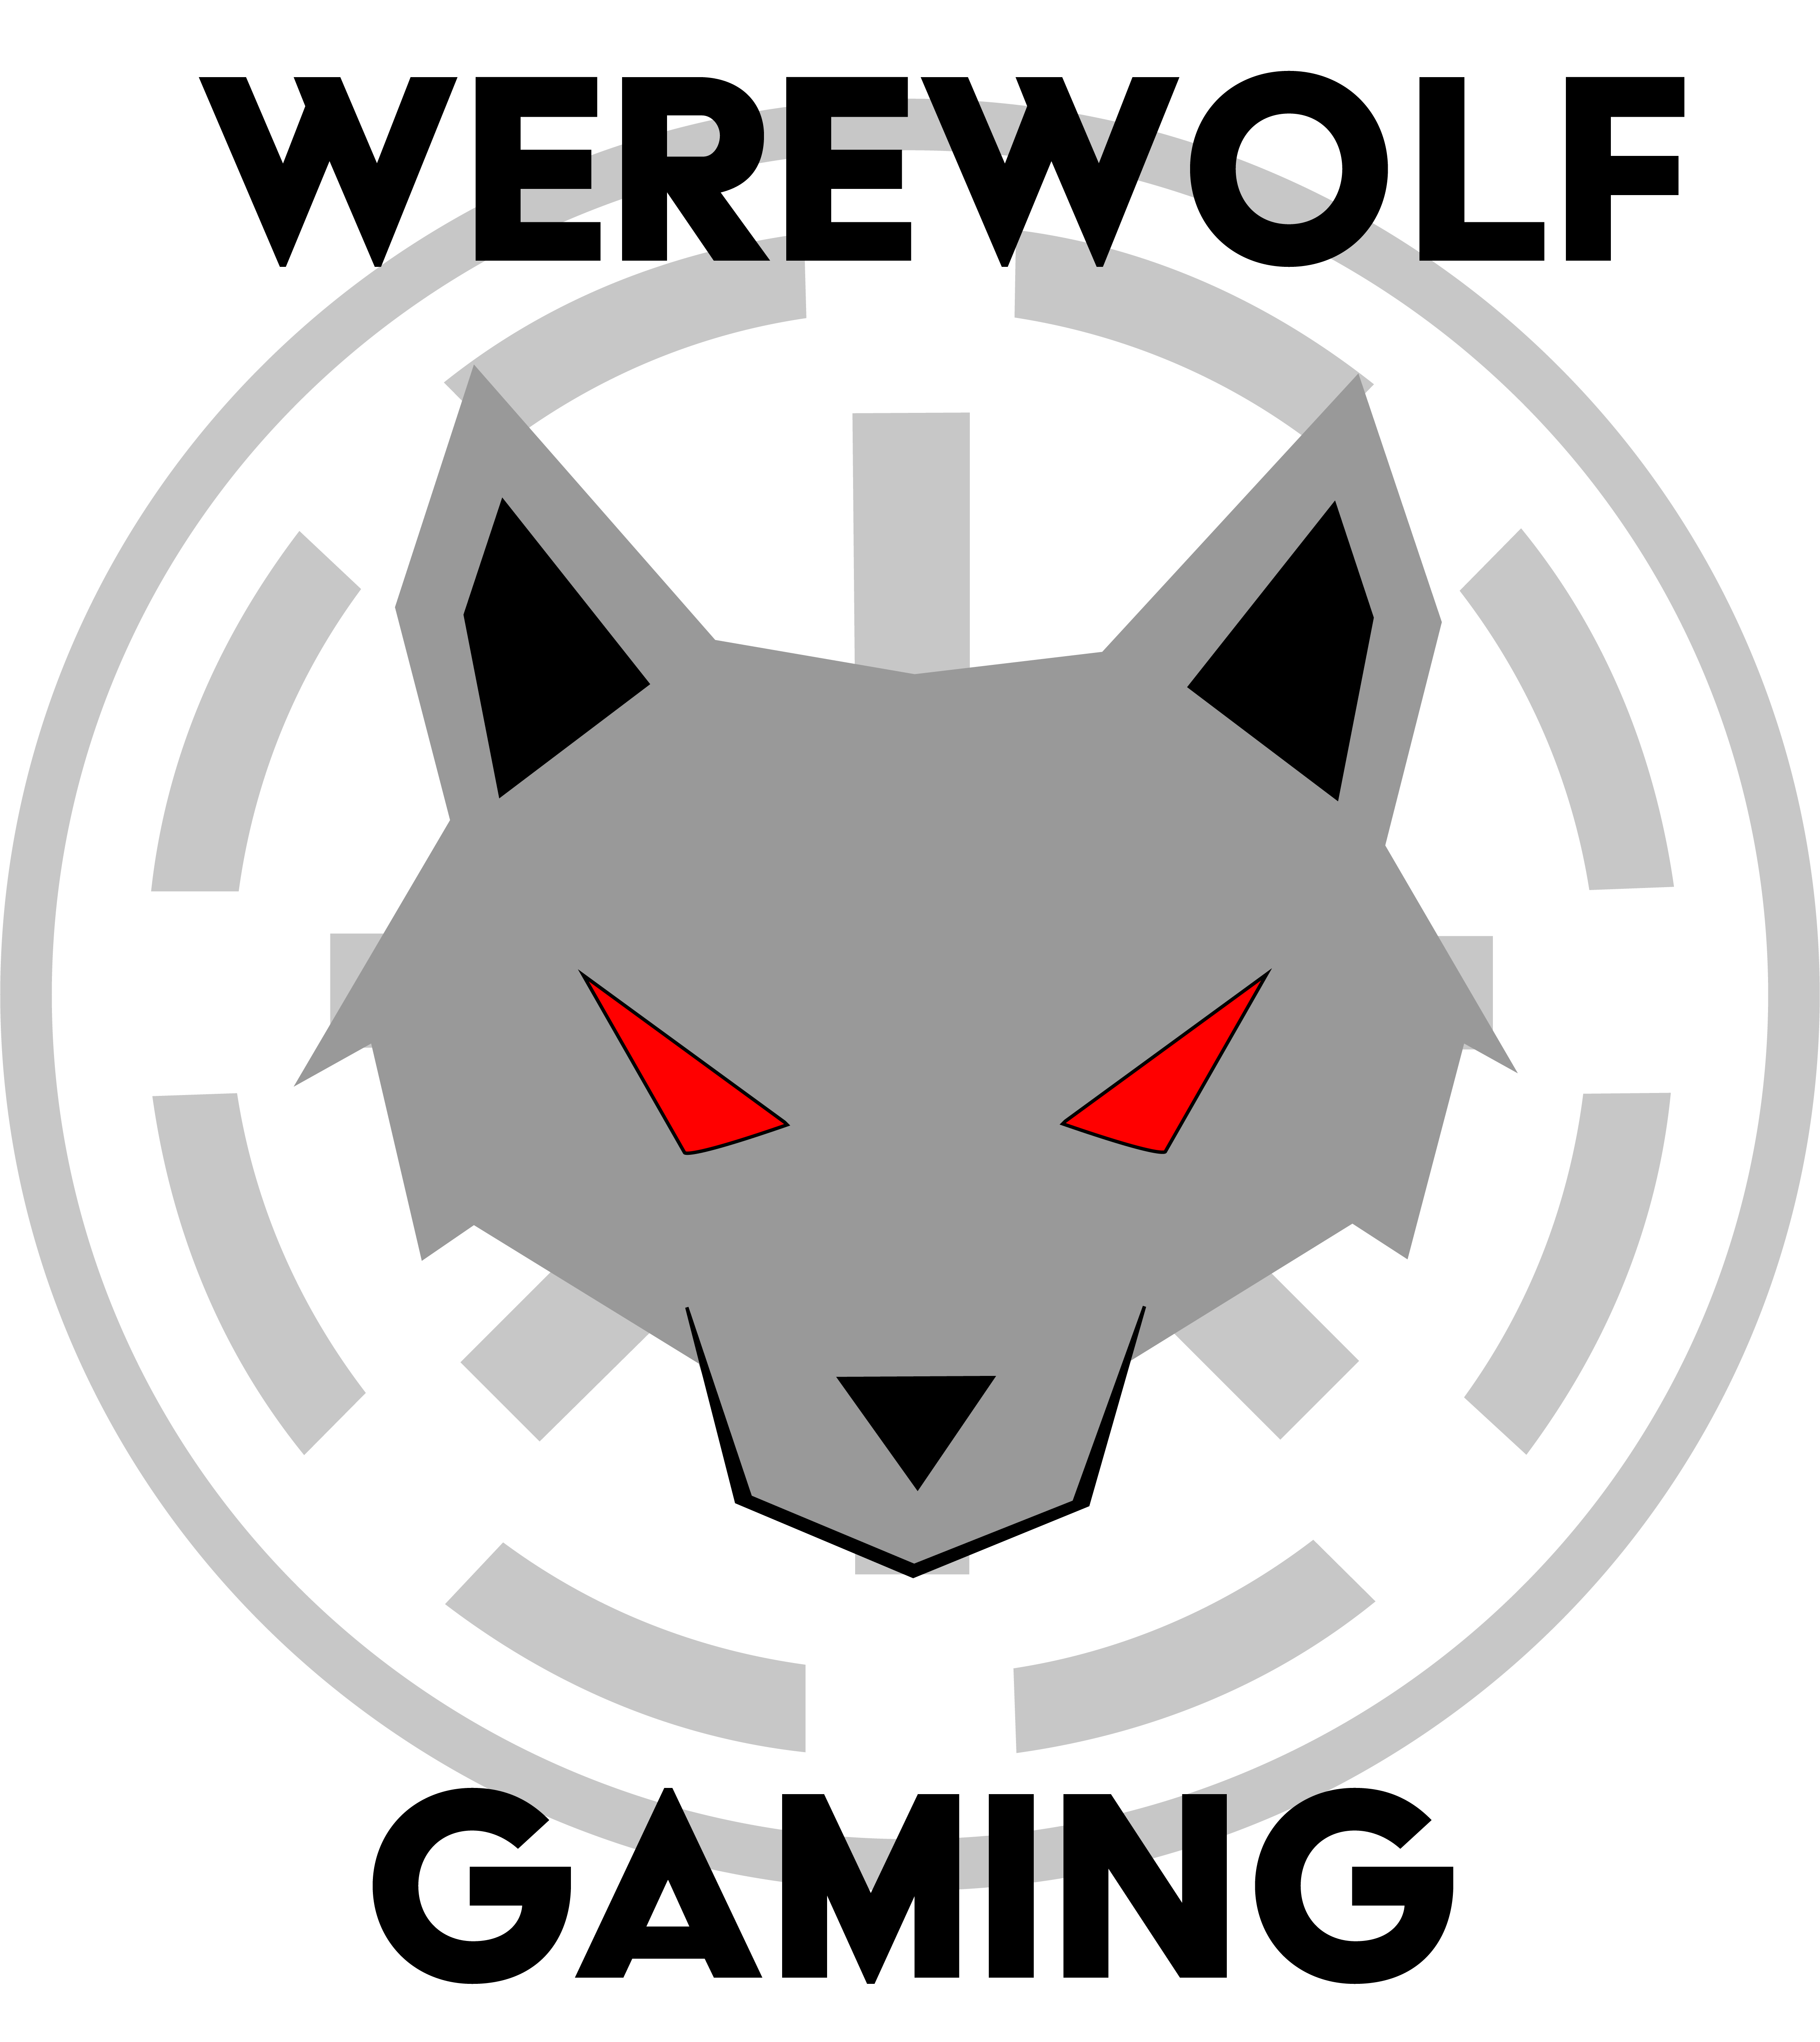 Steal Logo - My (Vector) recreation of the Werewolf logo. (Please dont steal it.)